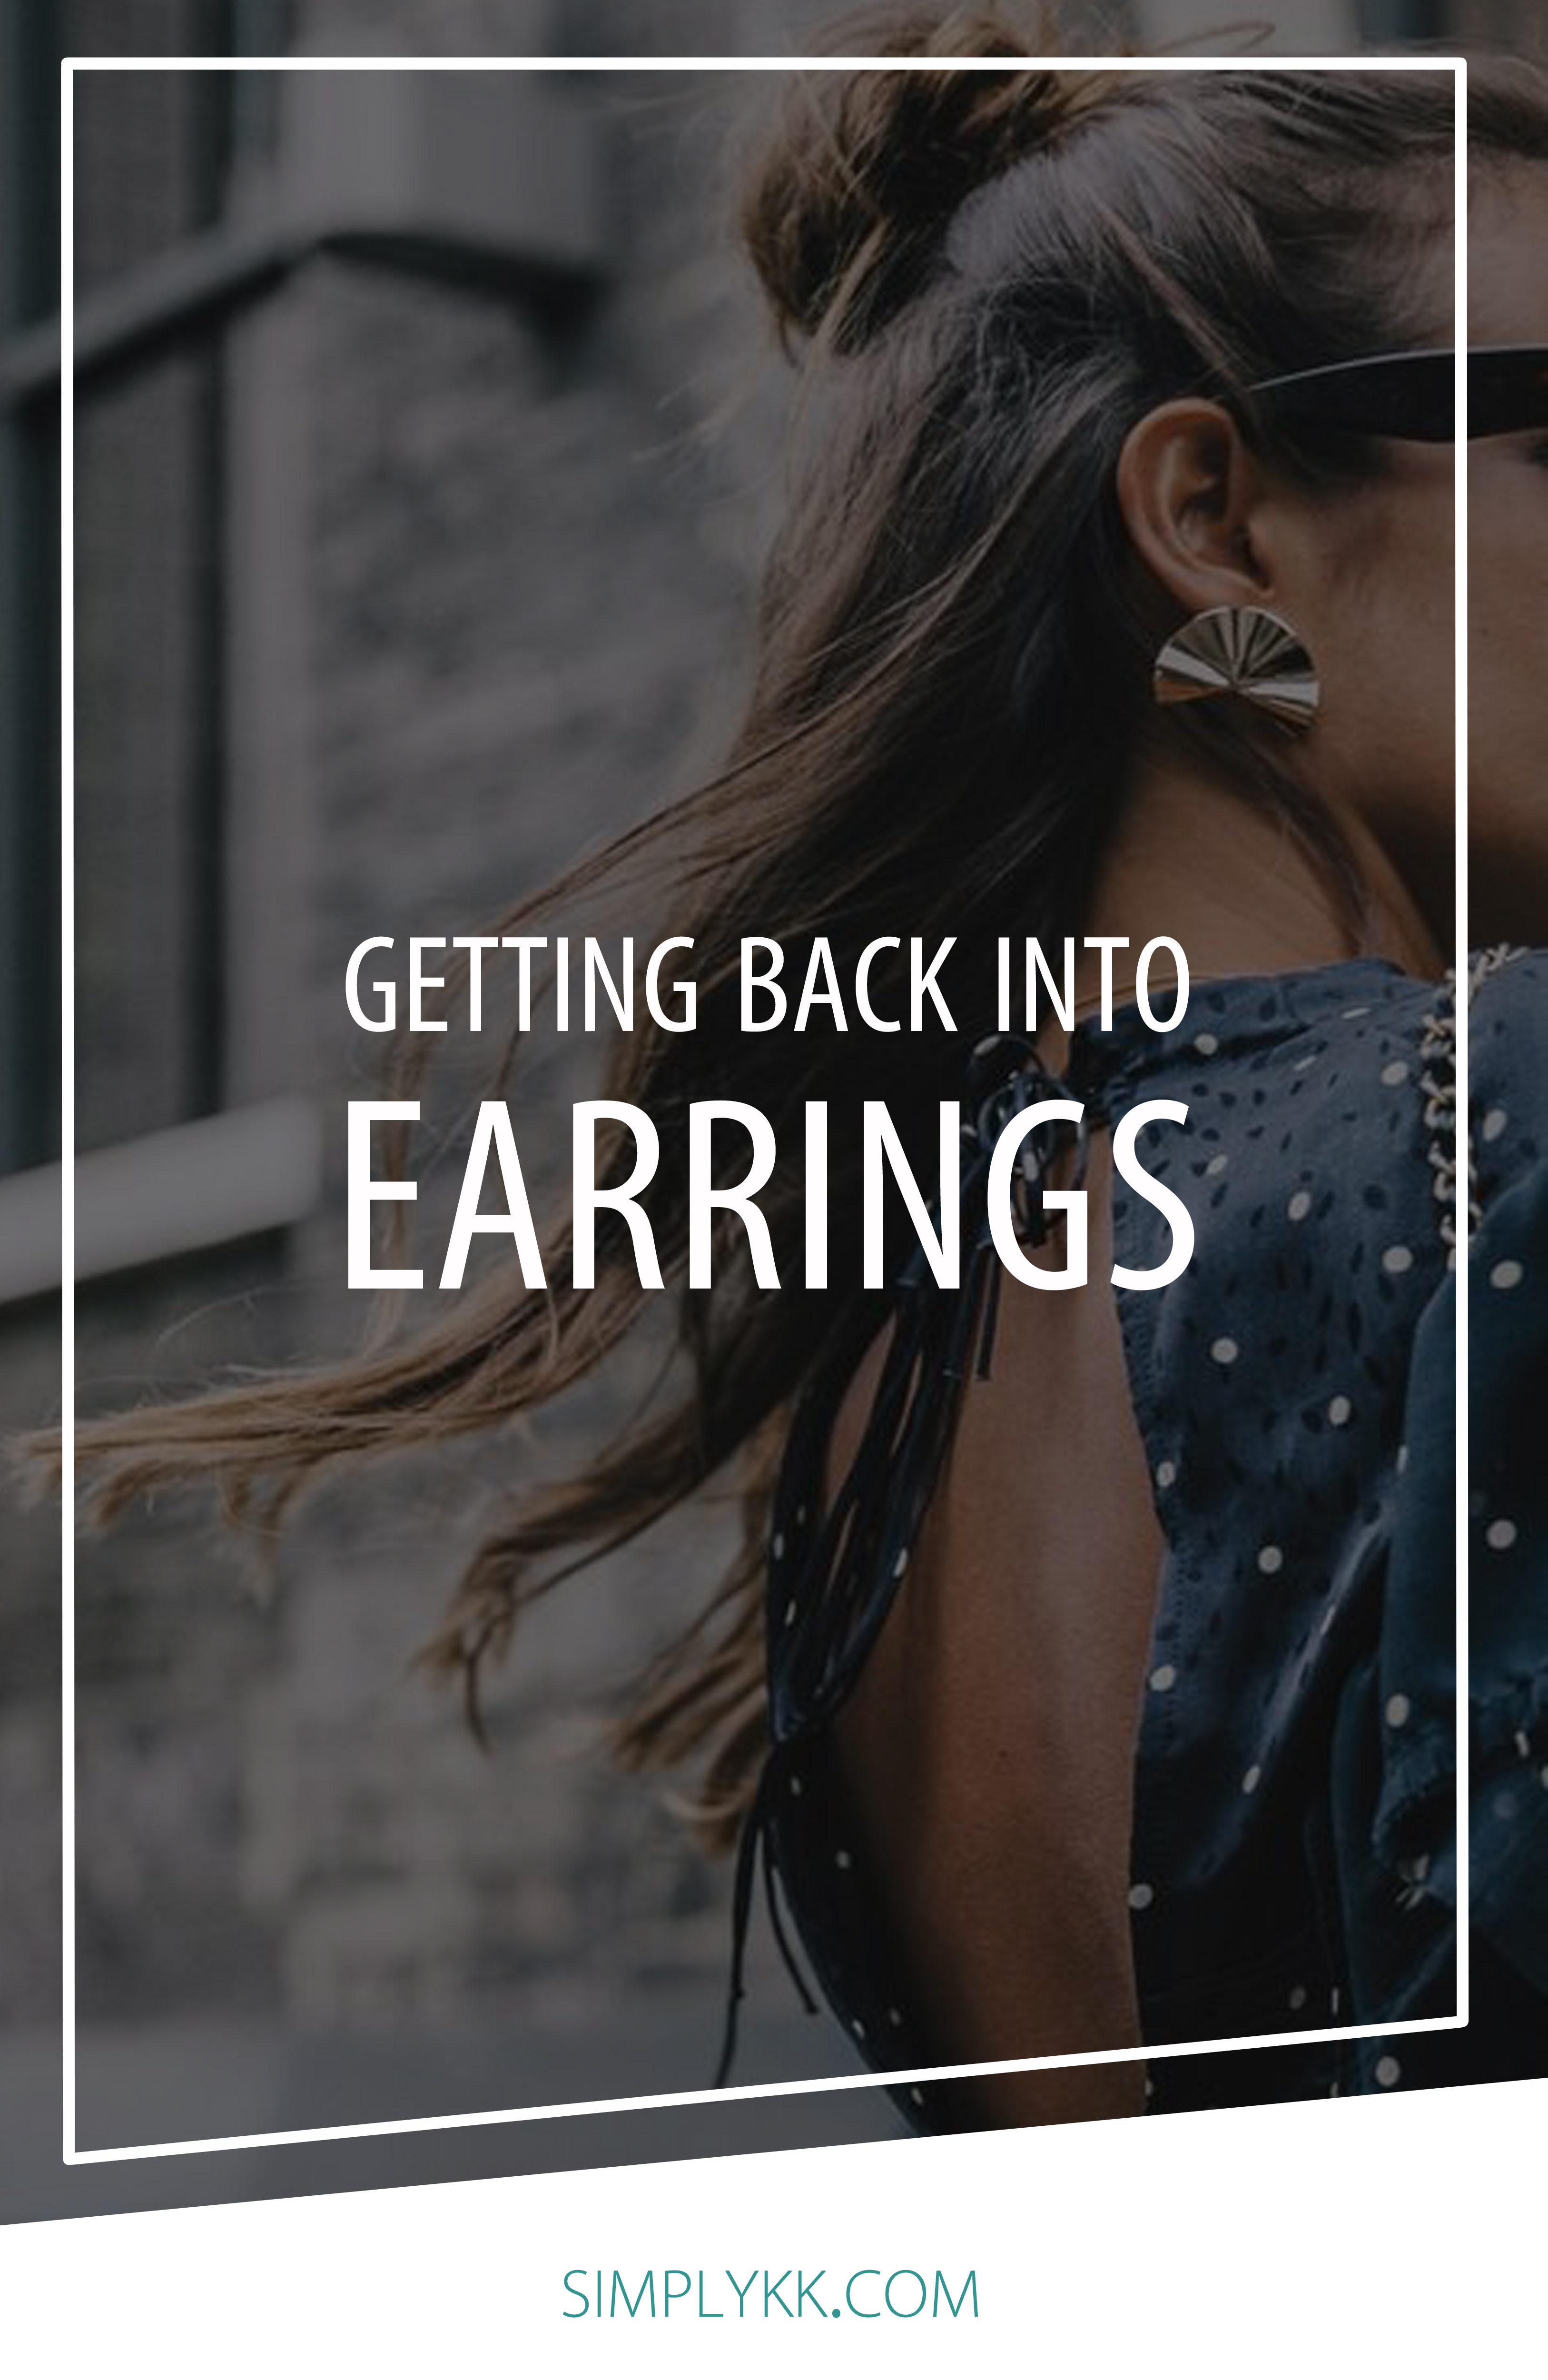 Getting back into earrings: styles to inspire you